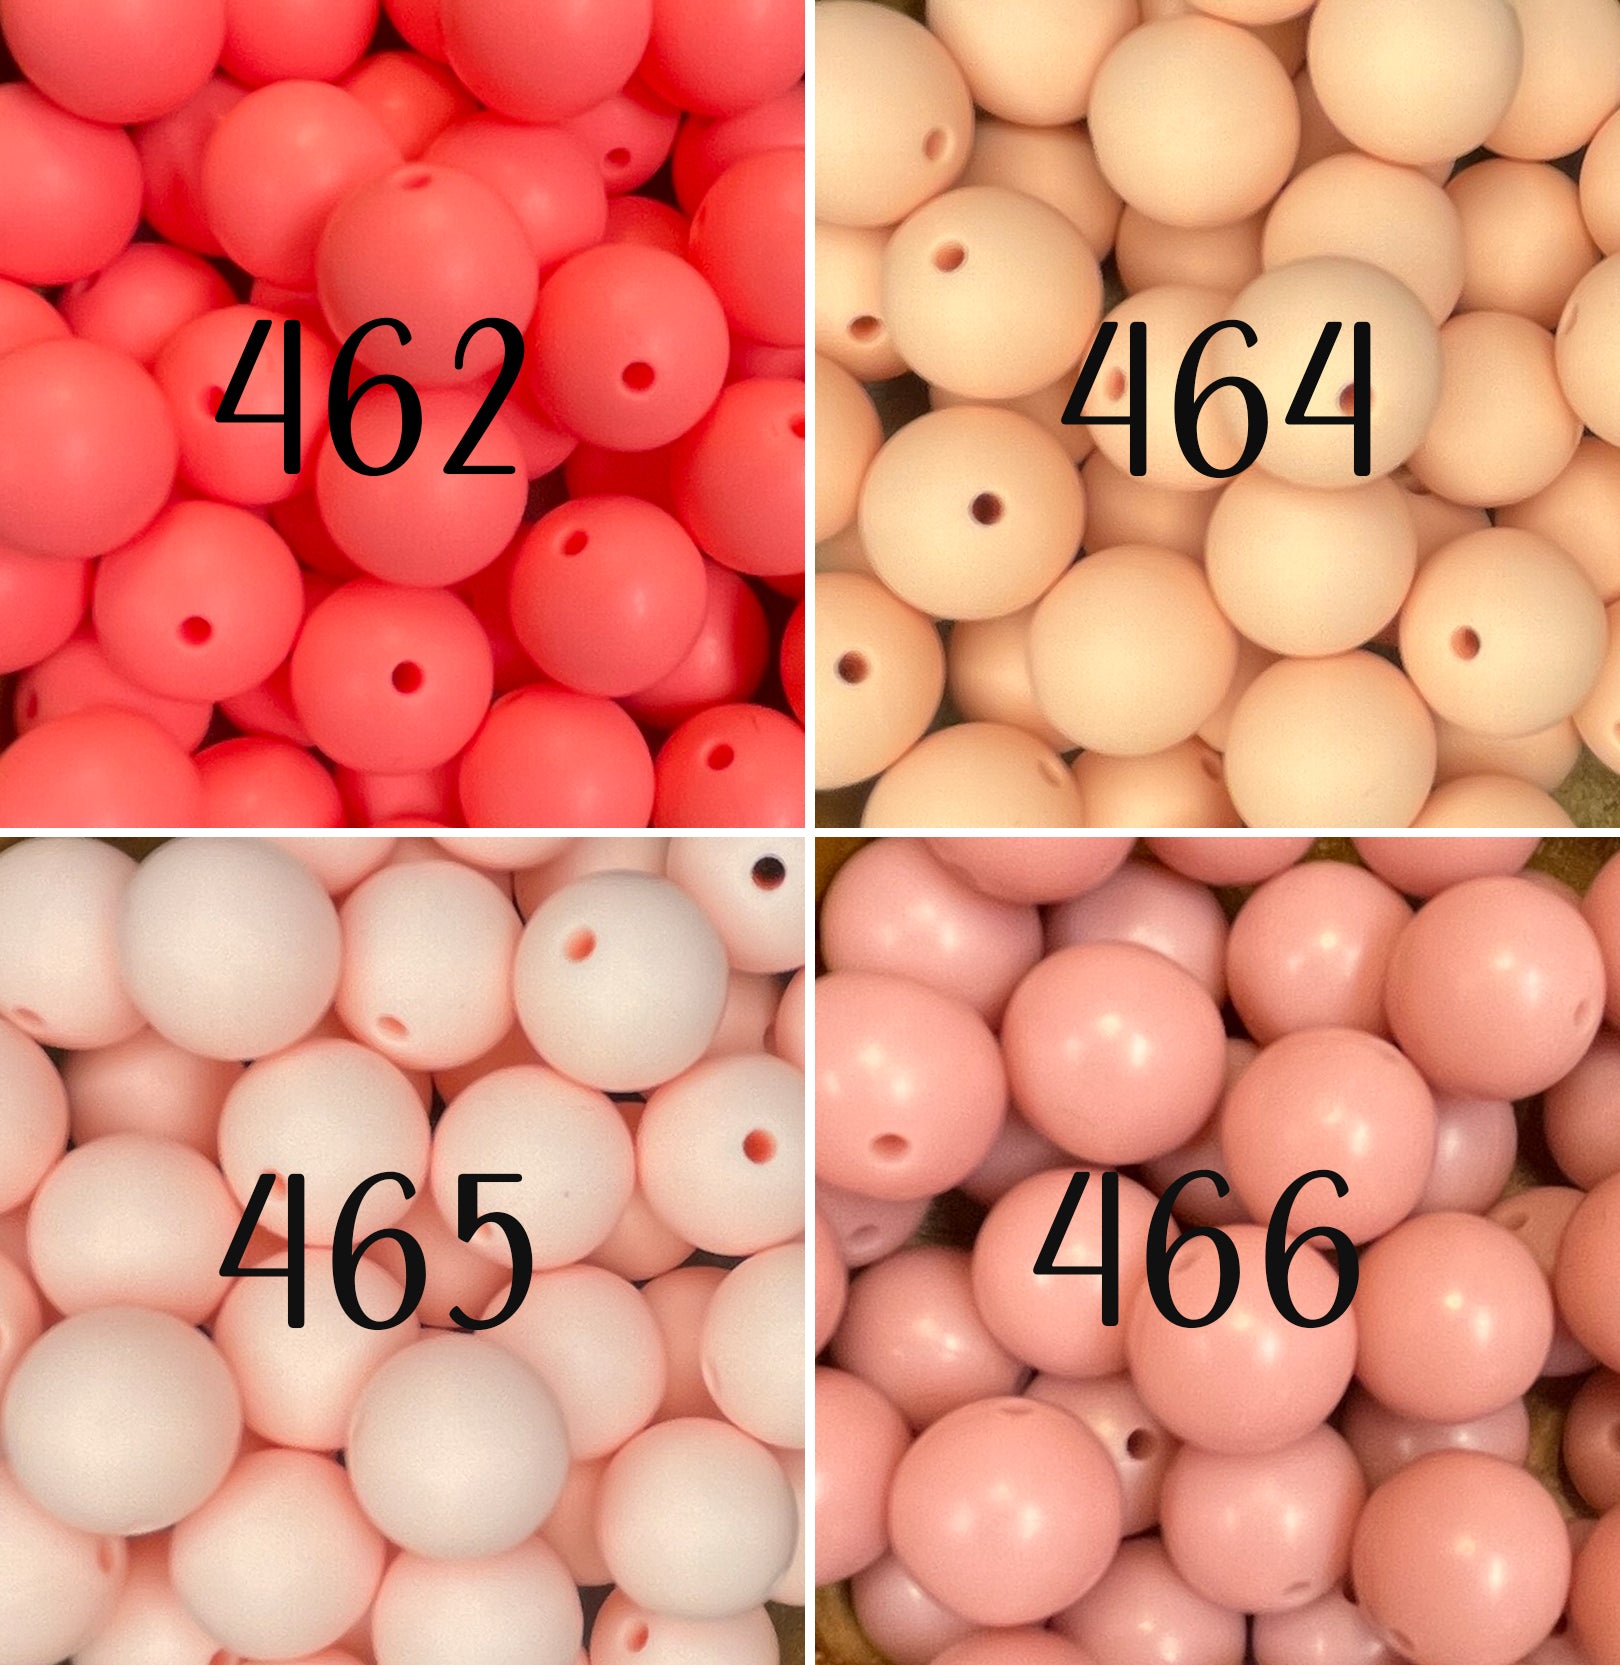 Wholesale 120Pcs Silicone Beads 12mm Fluorescent Silicone Beads